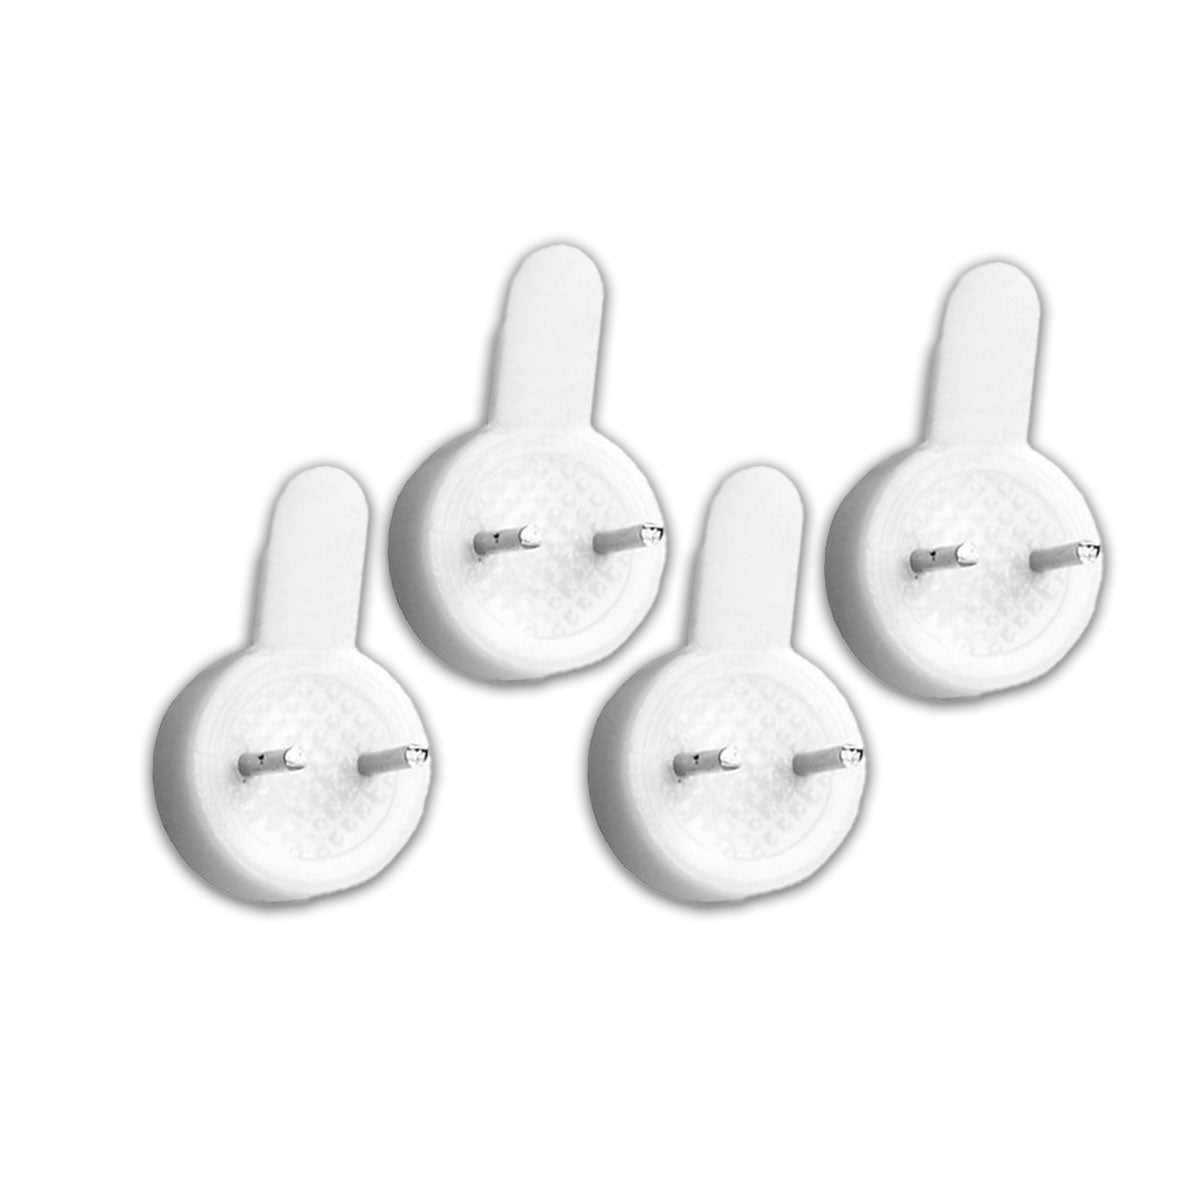 Duralon - Hard Wall Small Hooks - 4 Pack - Continental Food Store